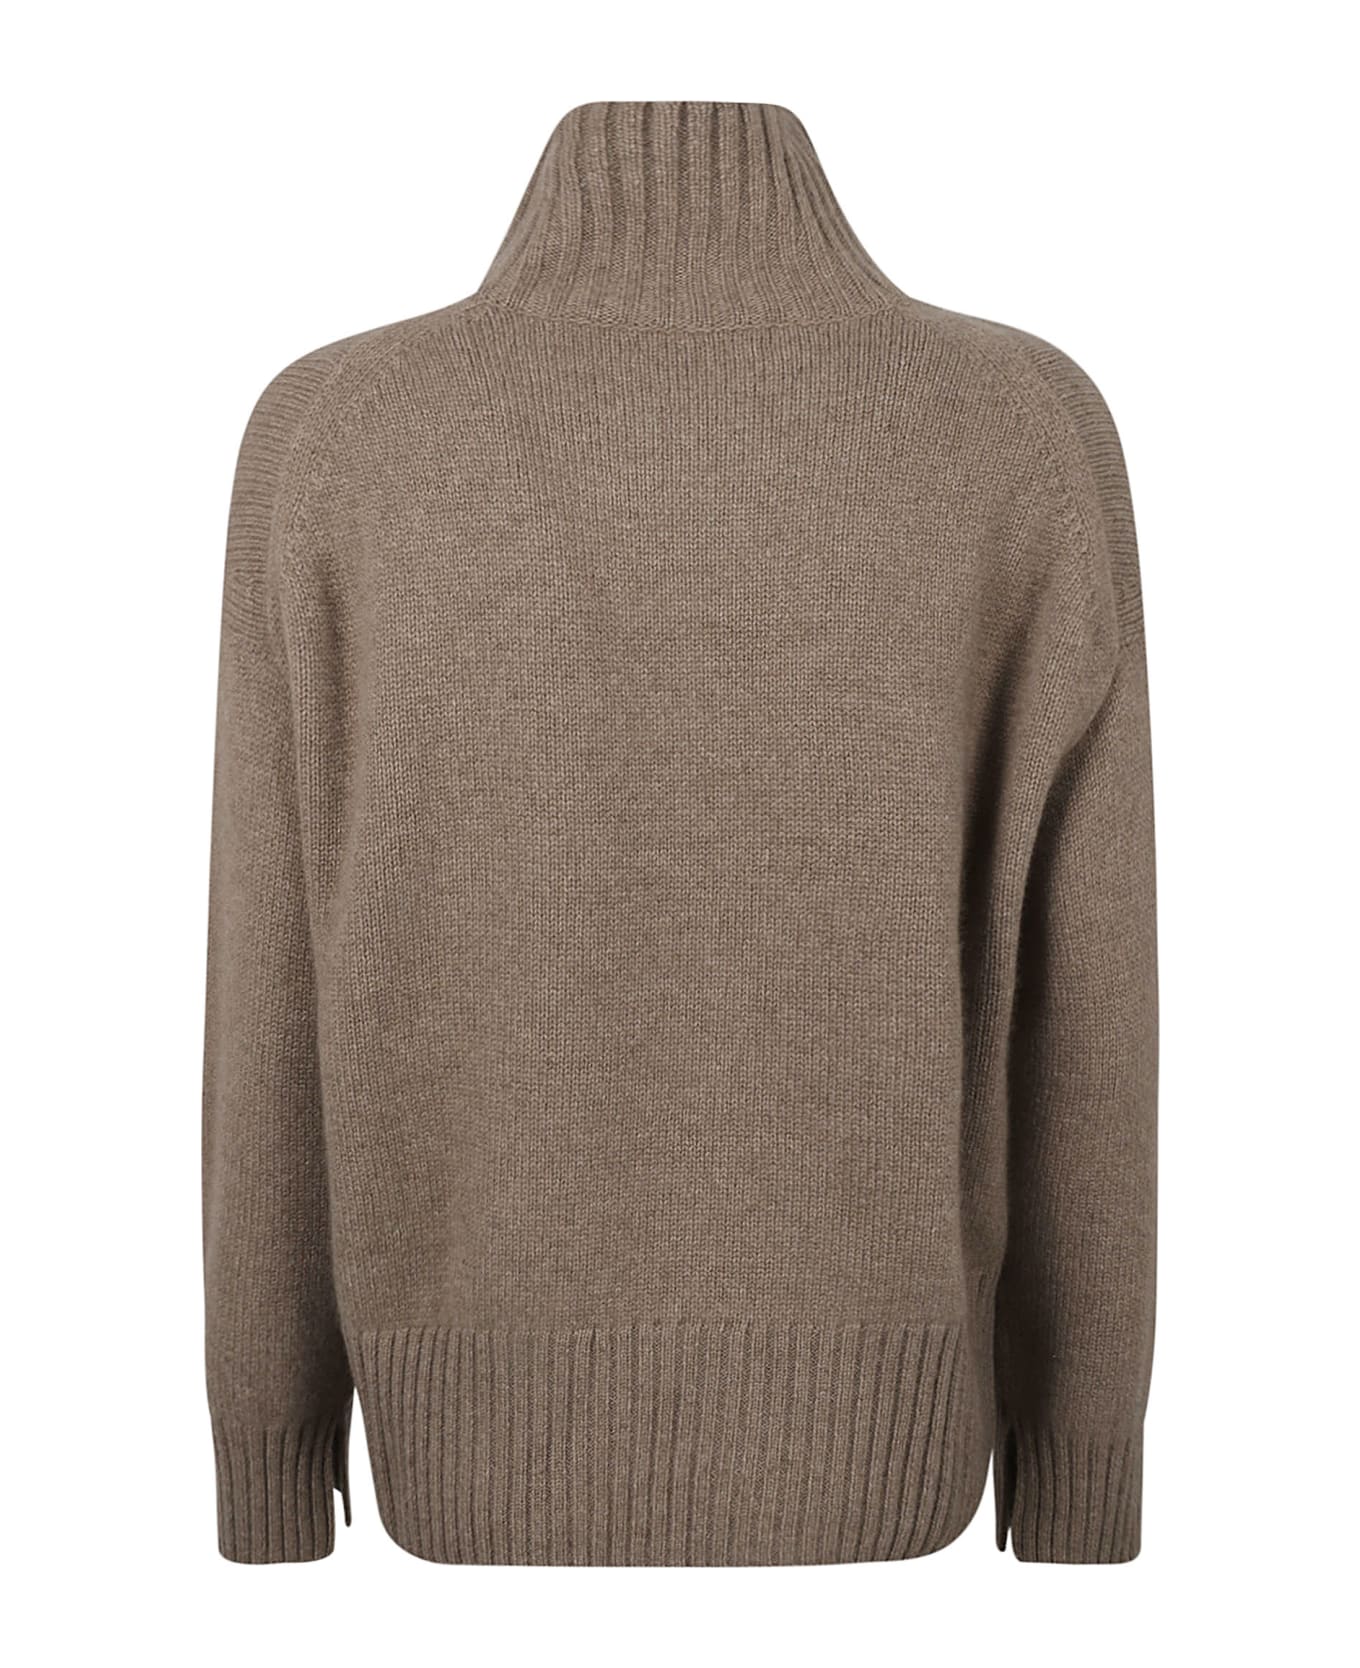 Be You Ribbed Sweater - Beige